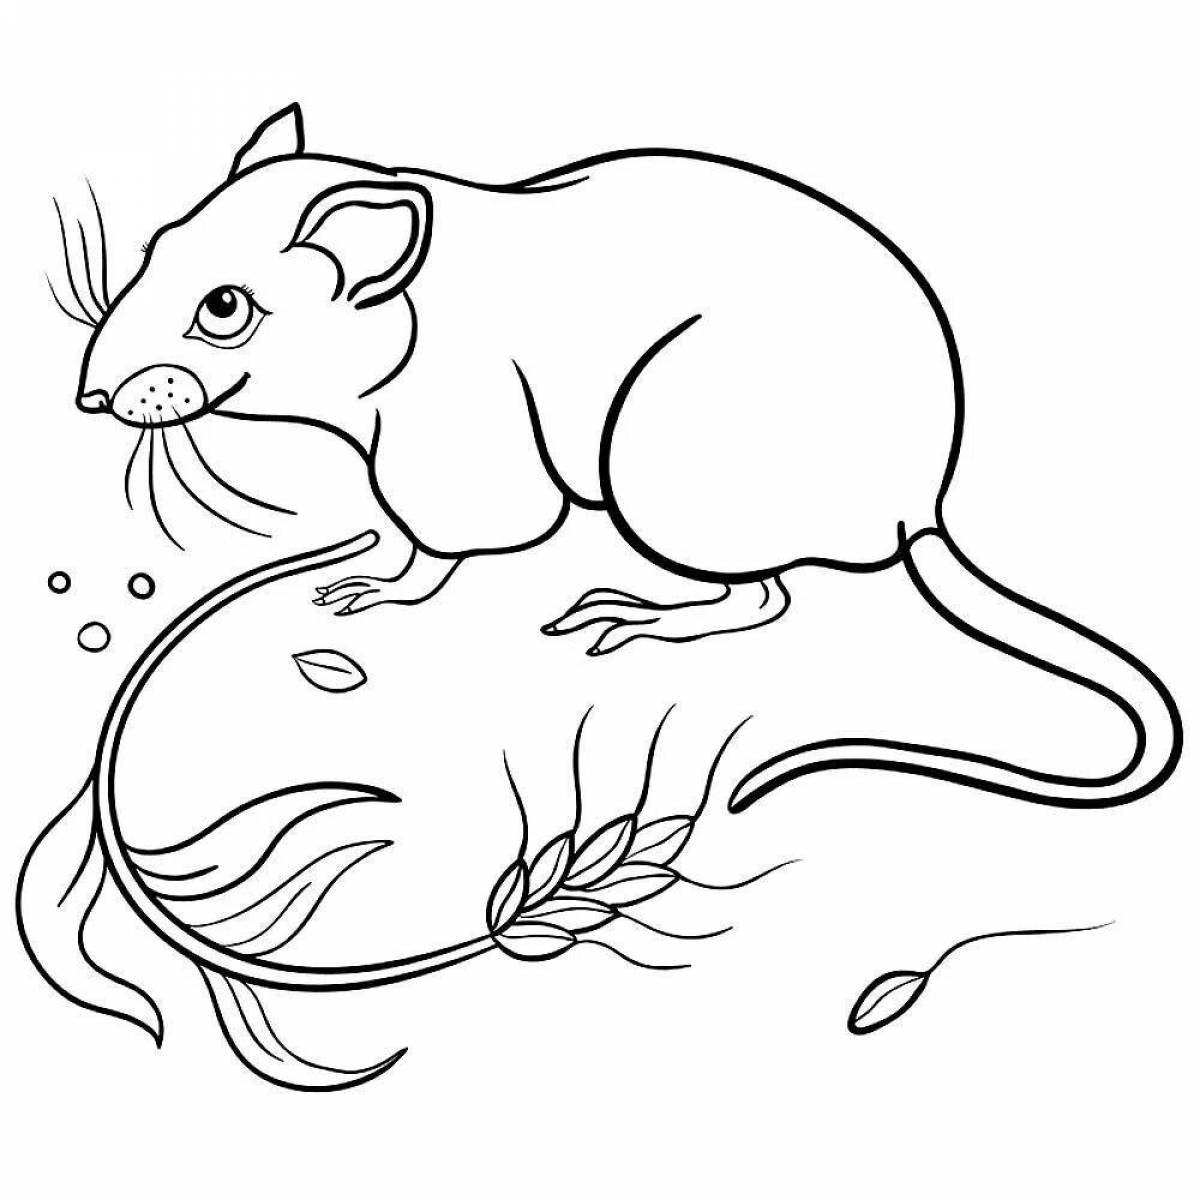 Radiant vole coloring book